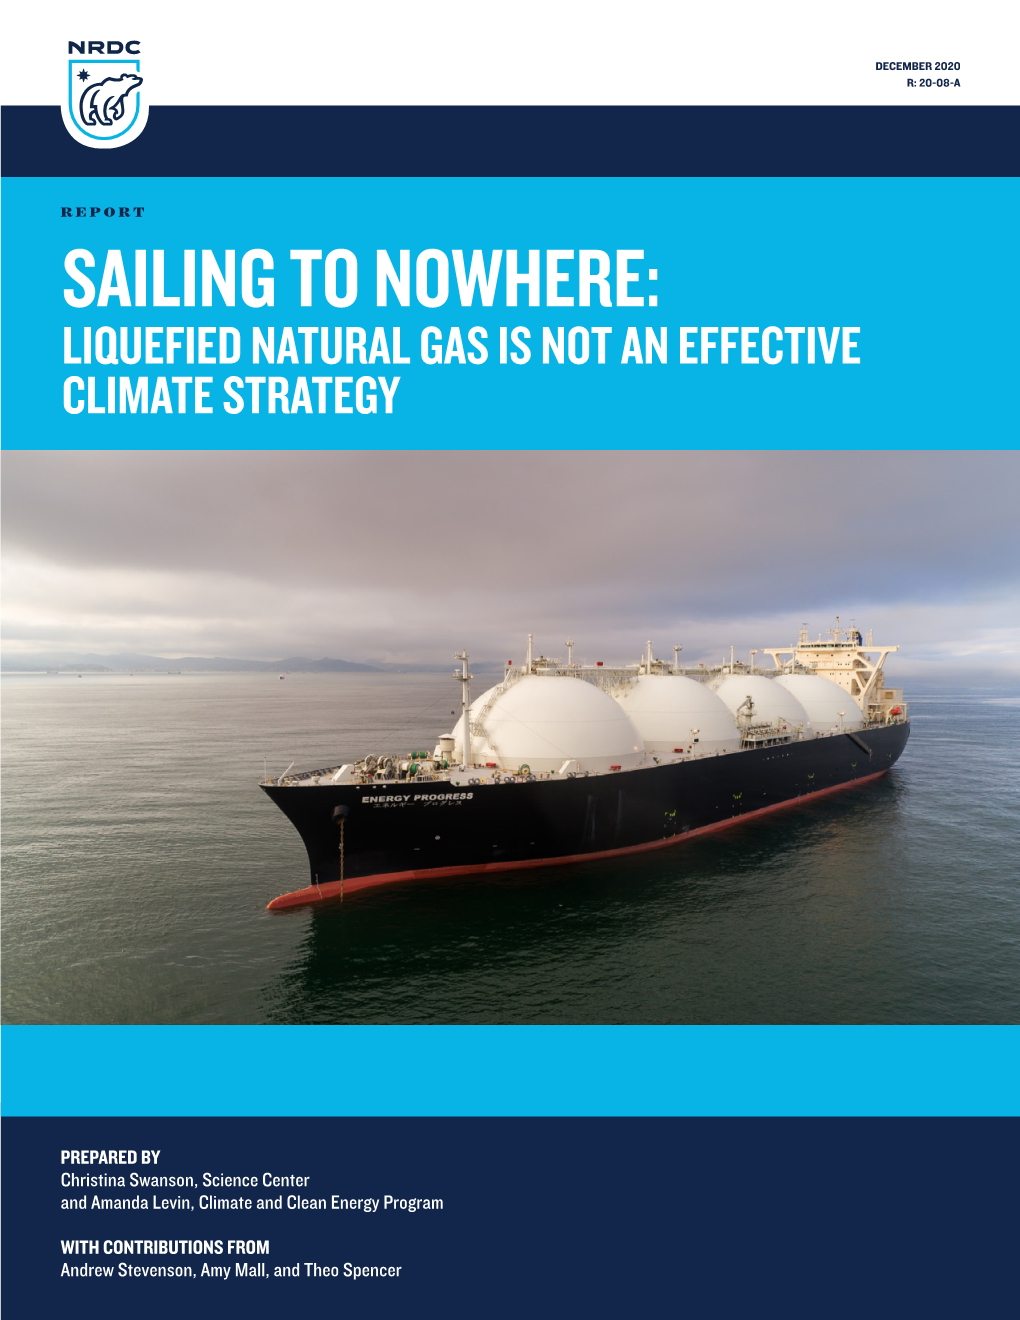 Sailing to Nowhere: Liquefied Natural Gas Is Not an Effective Climate Strategy